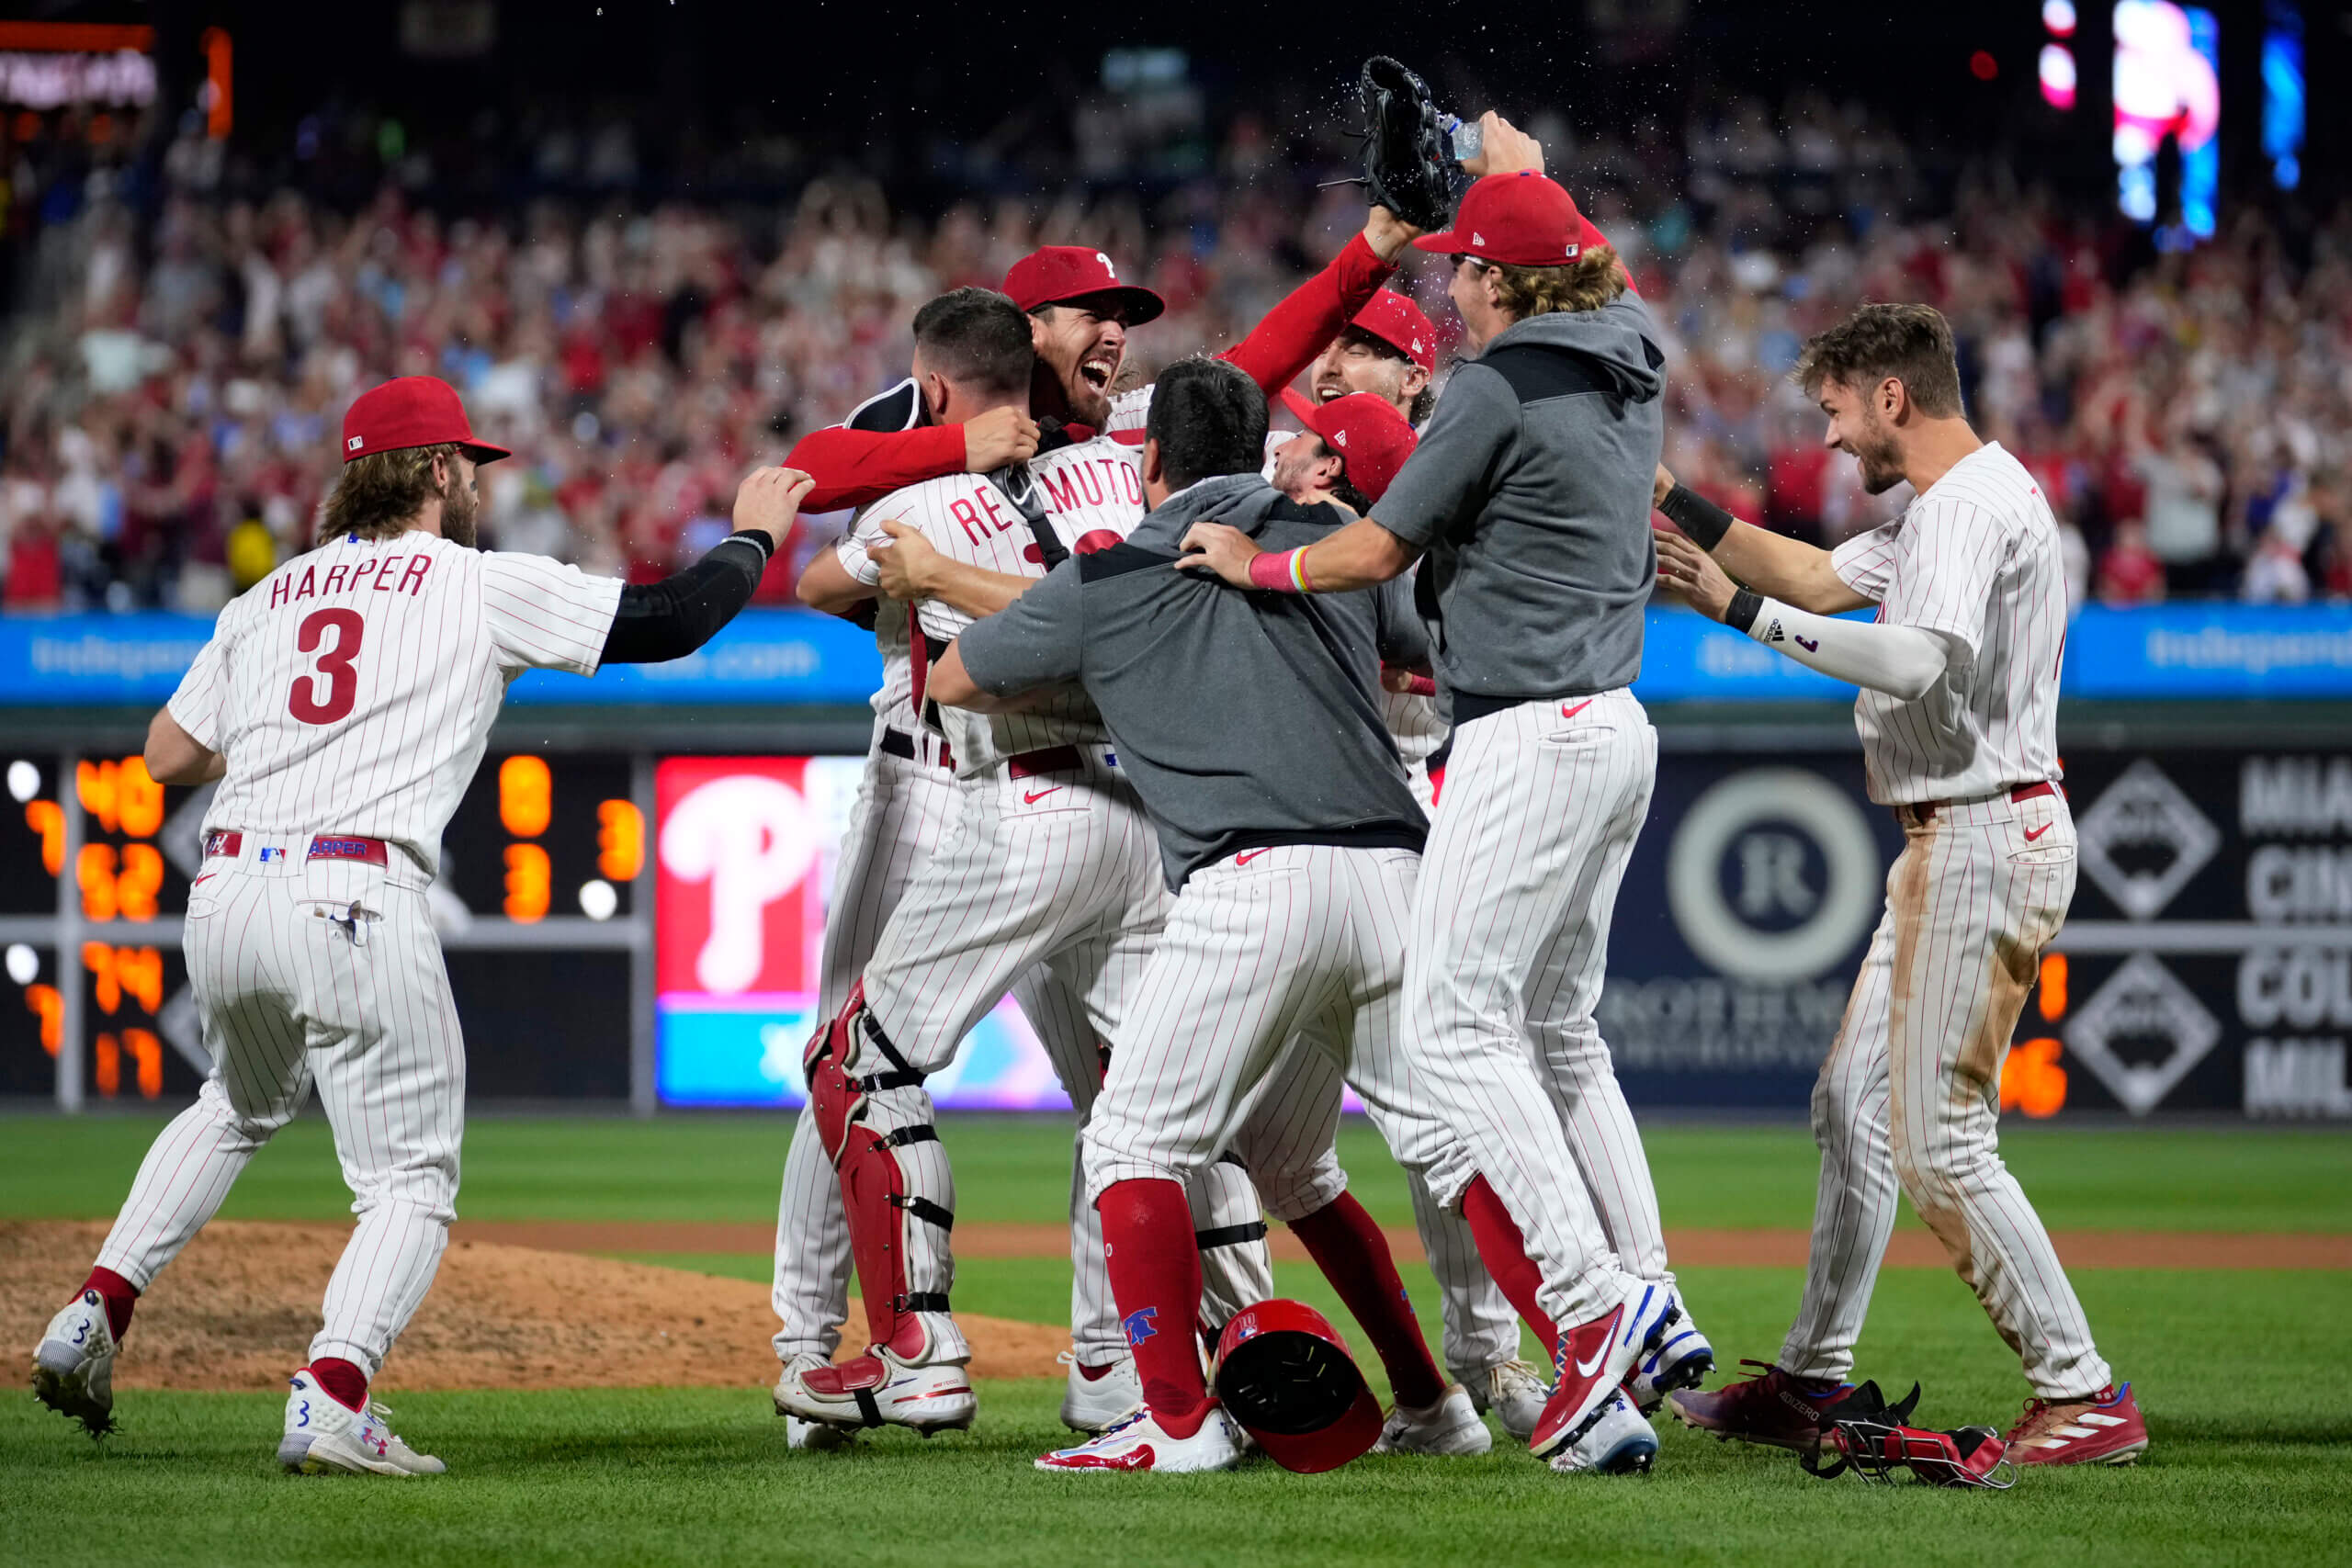 Phillies need to keep momentum to have another long postseason run in 2023  – Philly Sports